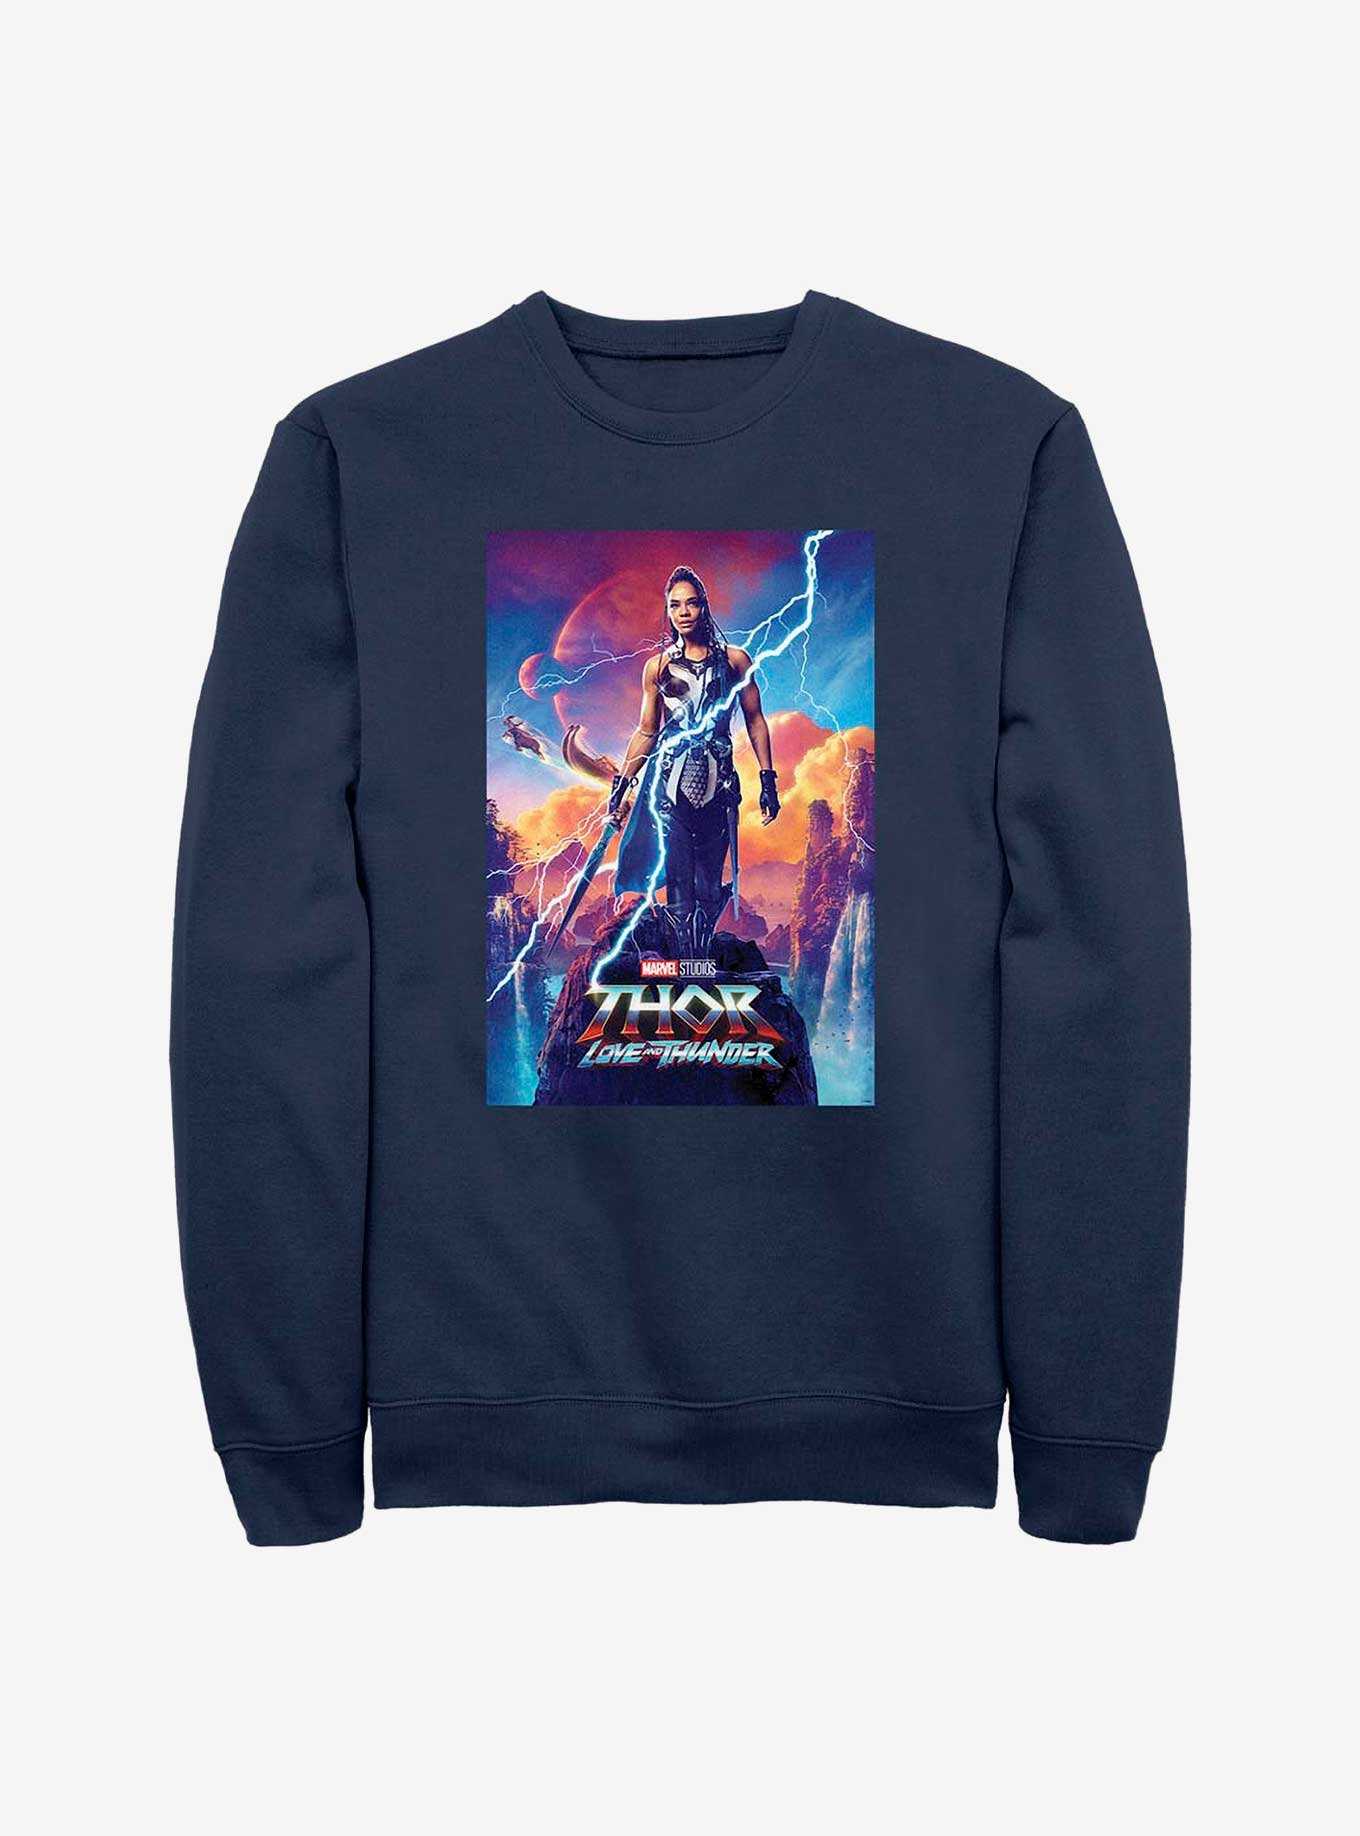 Marvel Thor: Love and Thunder Valkyrie Movie Poster Sweatshirt, , hi-res